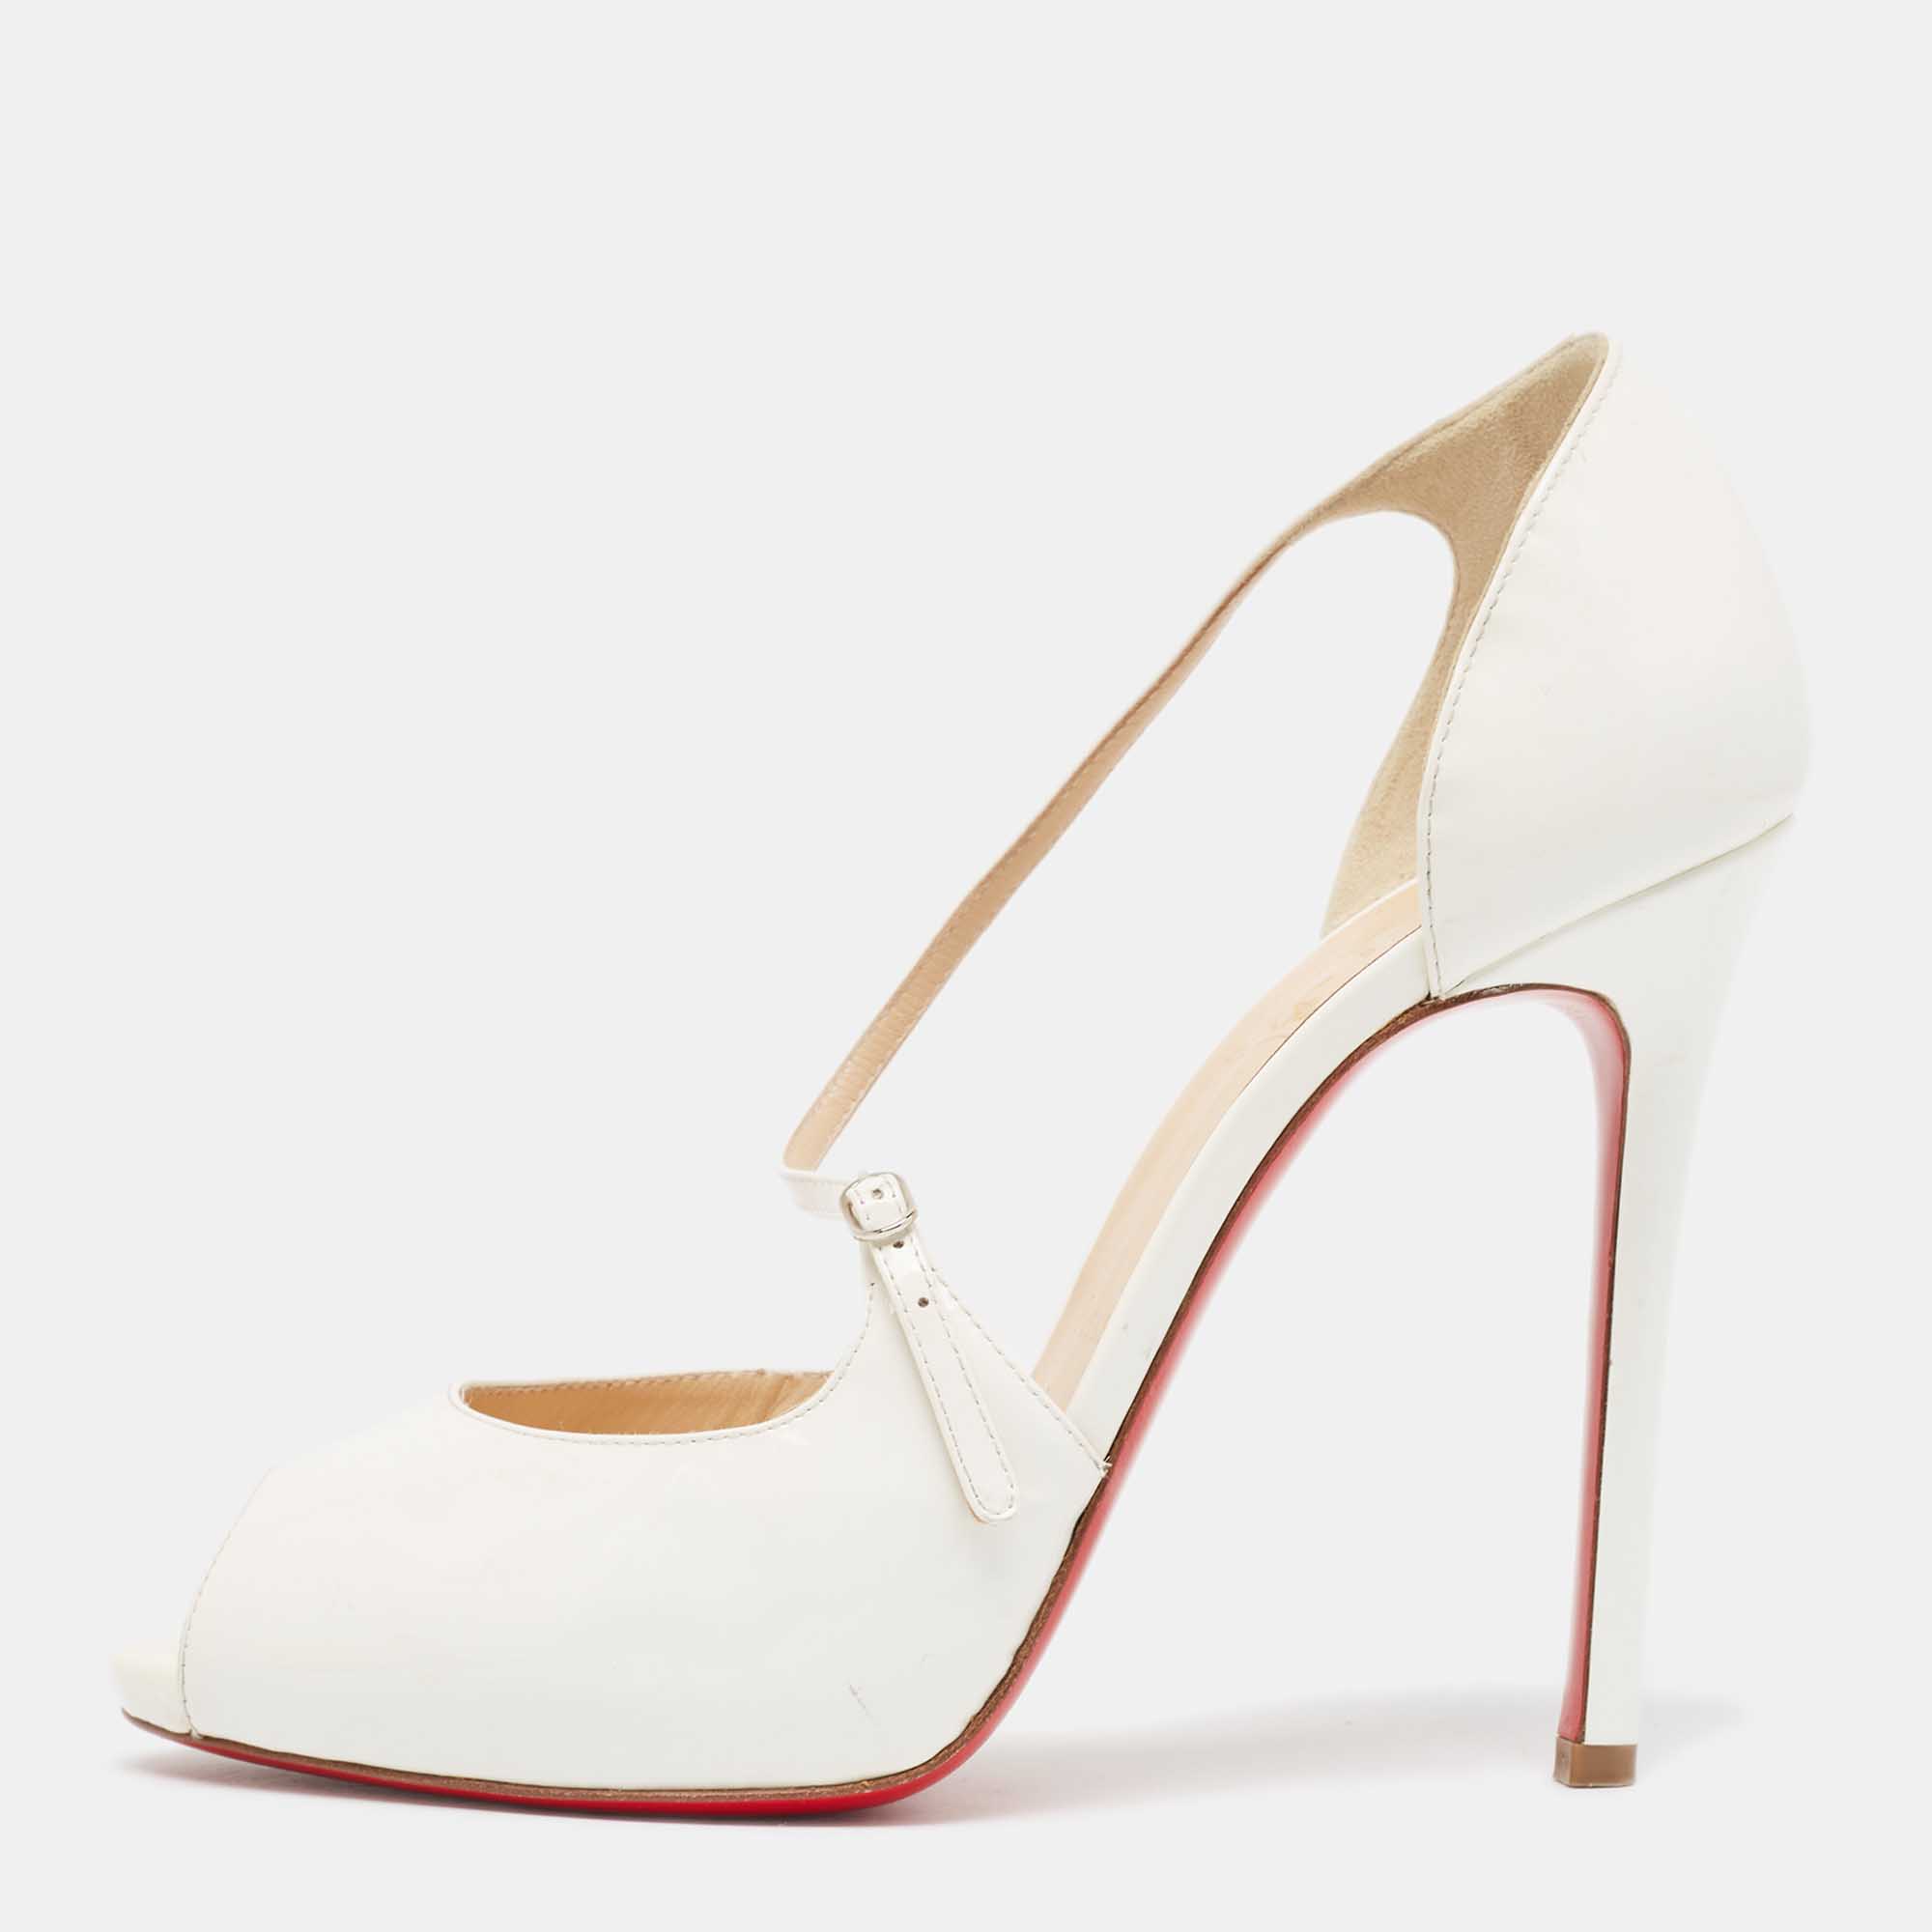 Christian louboutin white patent leather peep toe d'orsay pumps size 39.5